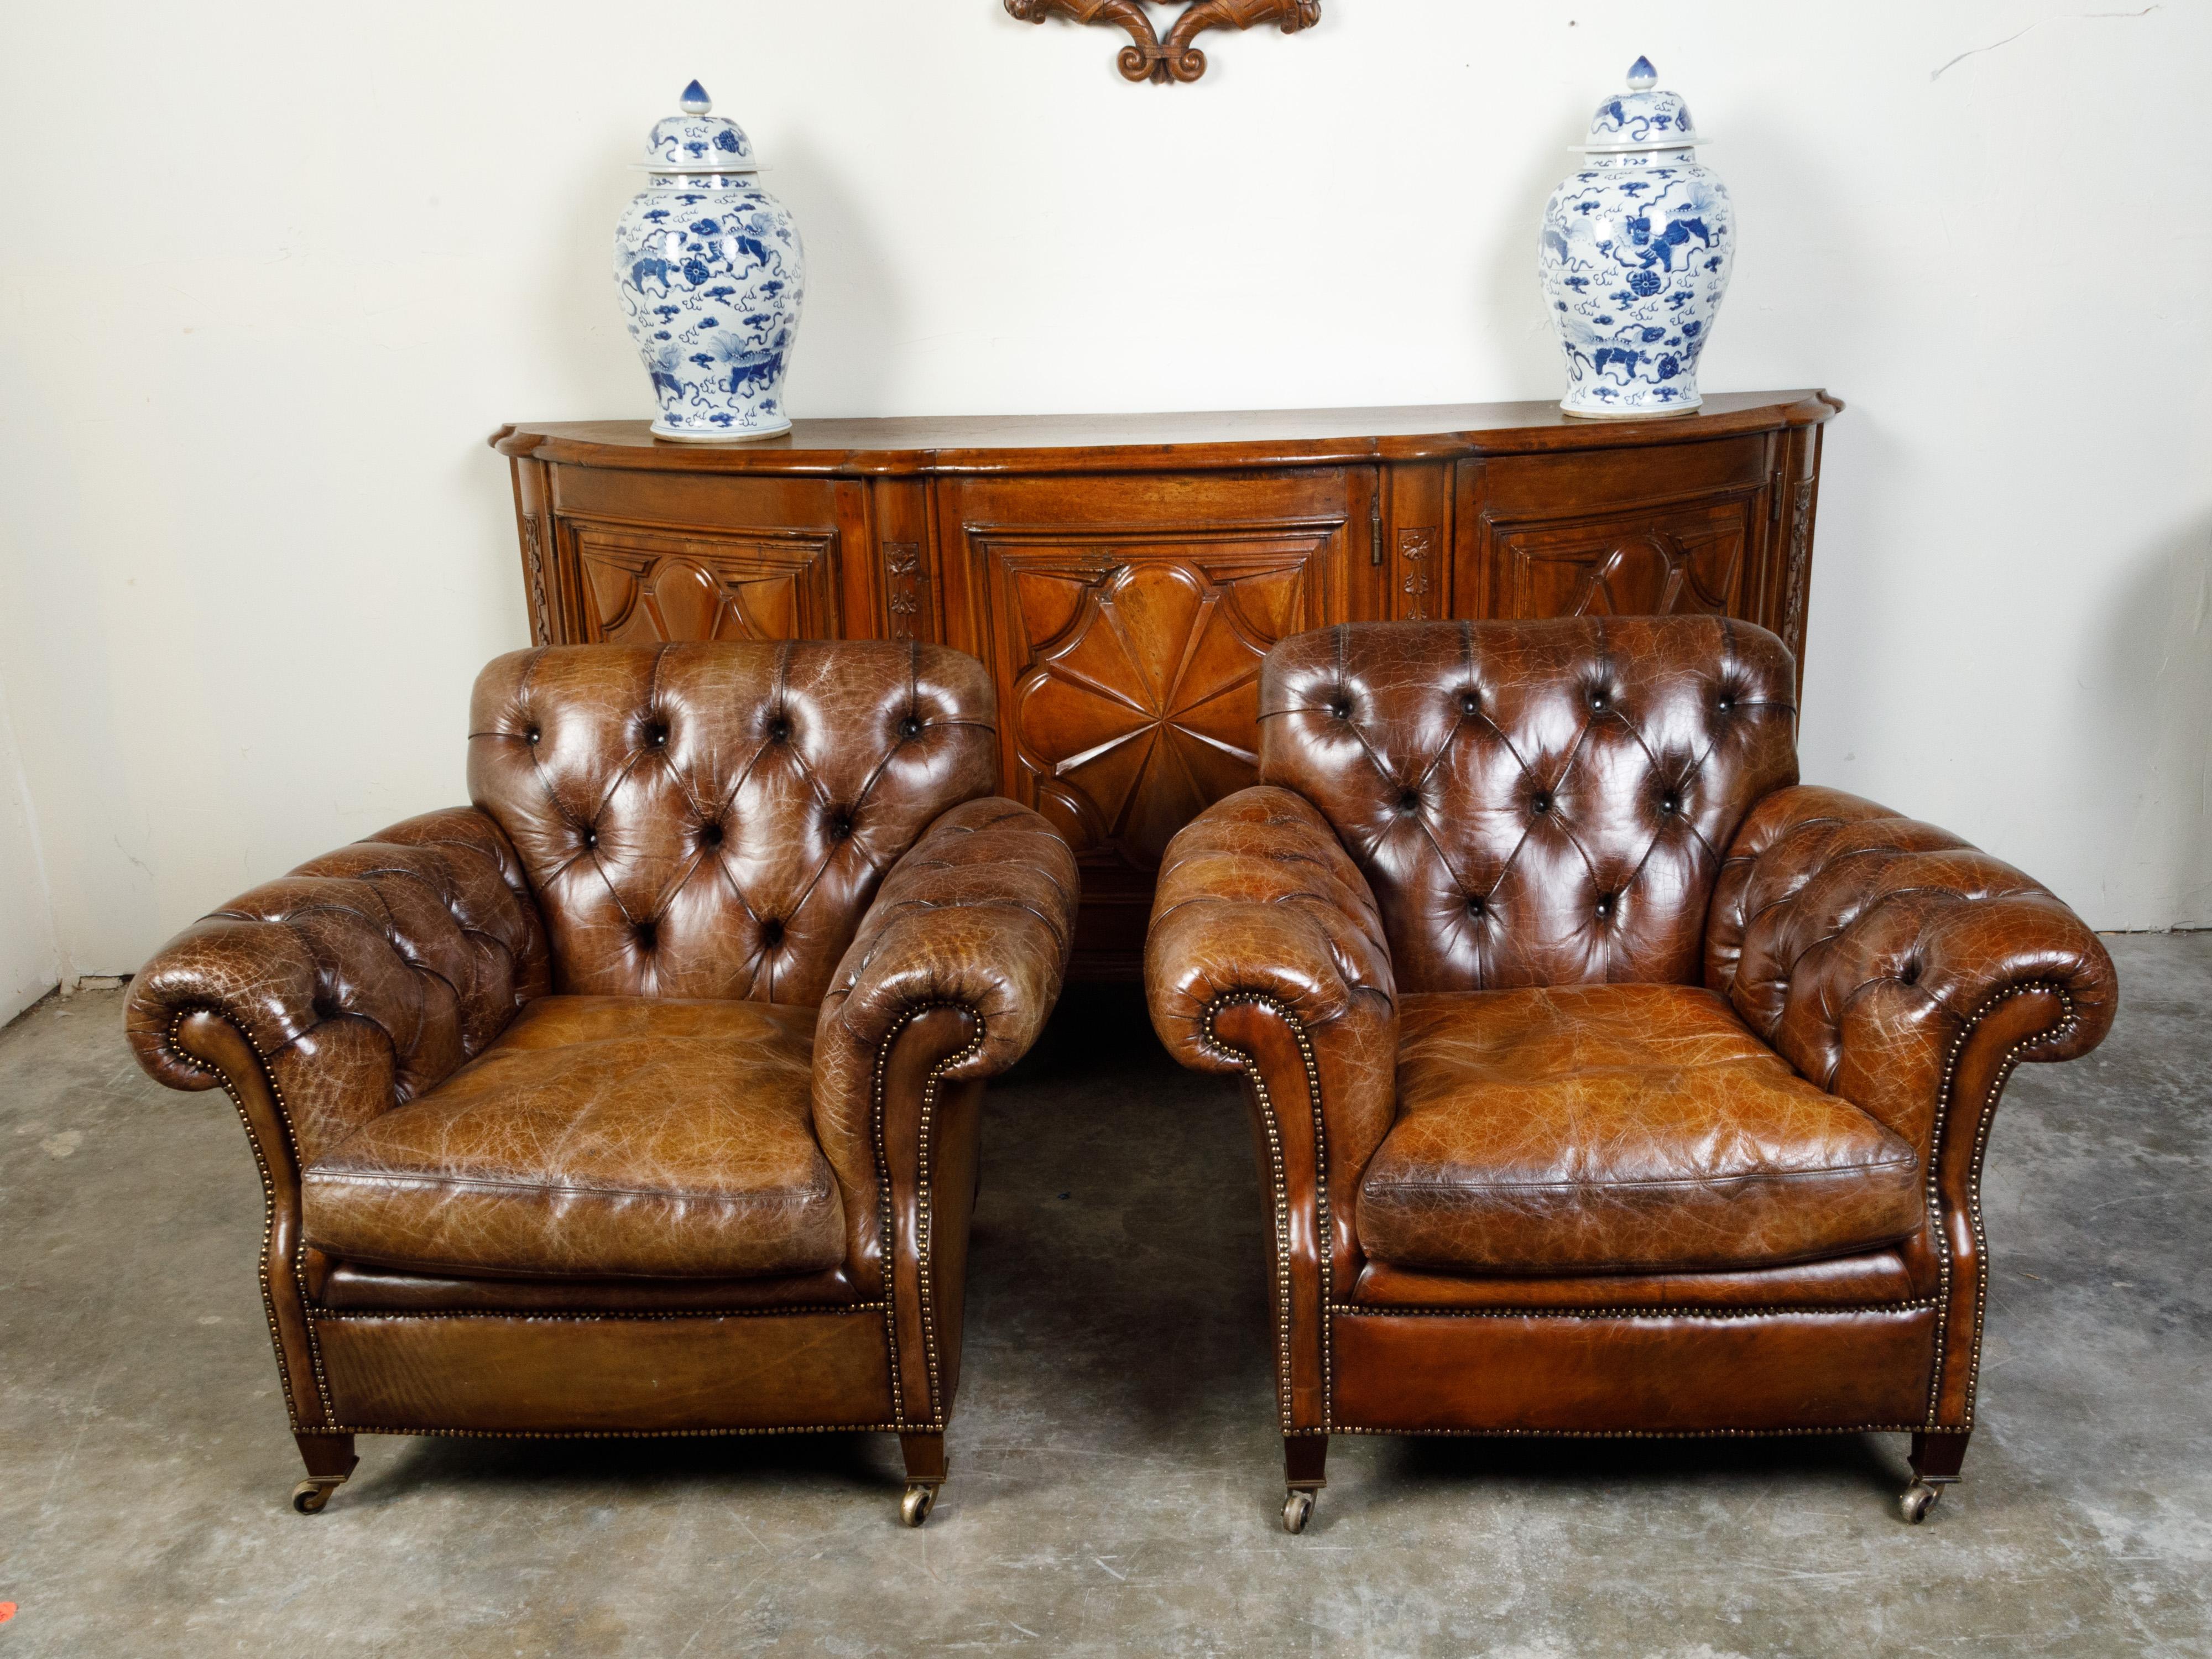 A pair of English vintage tufted leather club chairs from the mid 20th century, with out-scrolling arms and brass casters. Created in England during the Midcentury period, each of this pair of club chairs features a nicely weathered tufted leather